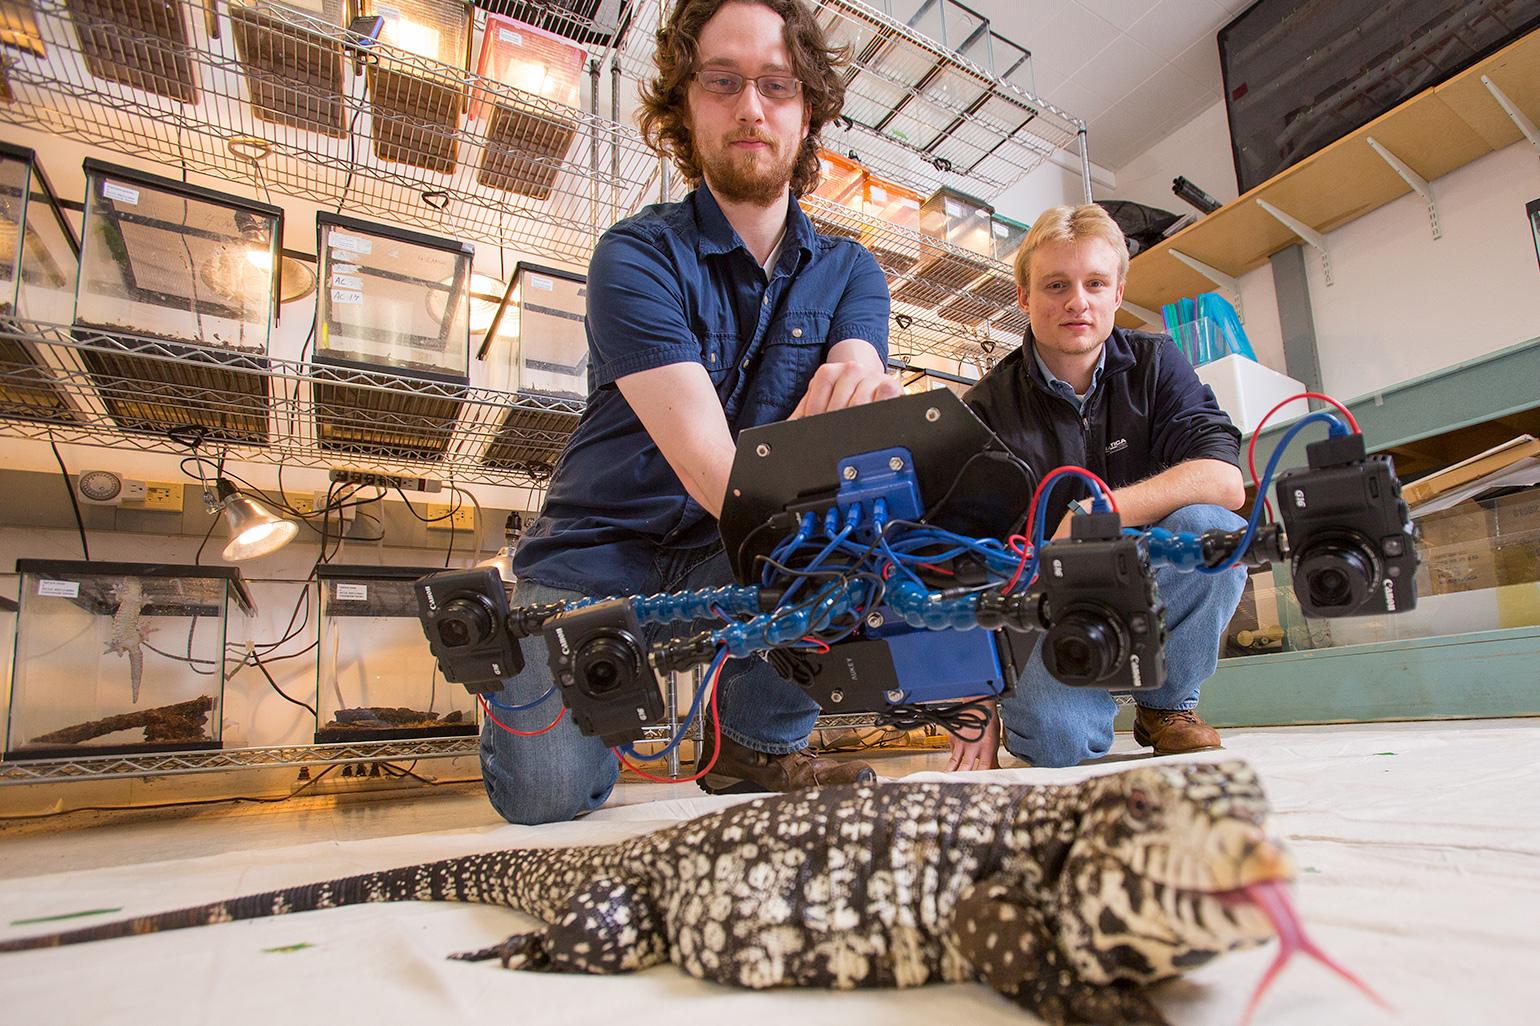 First Generation of the Beastcam Technology scanning a Tegu